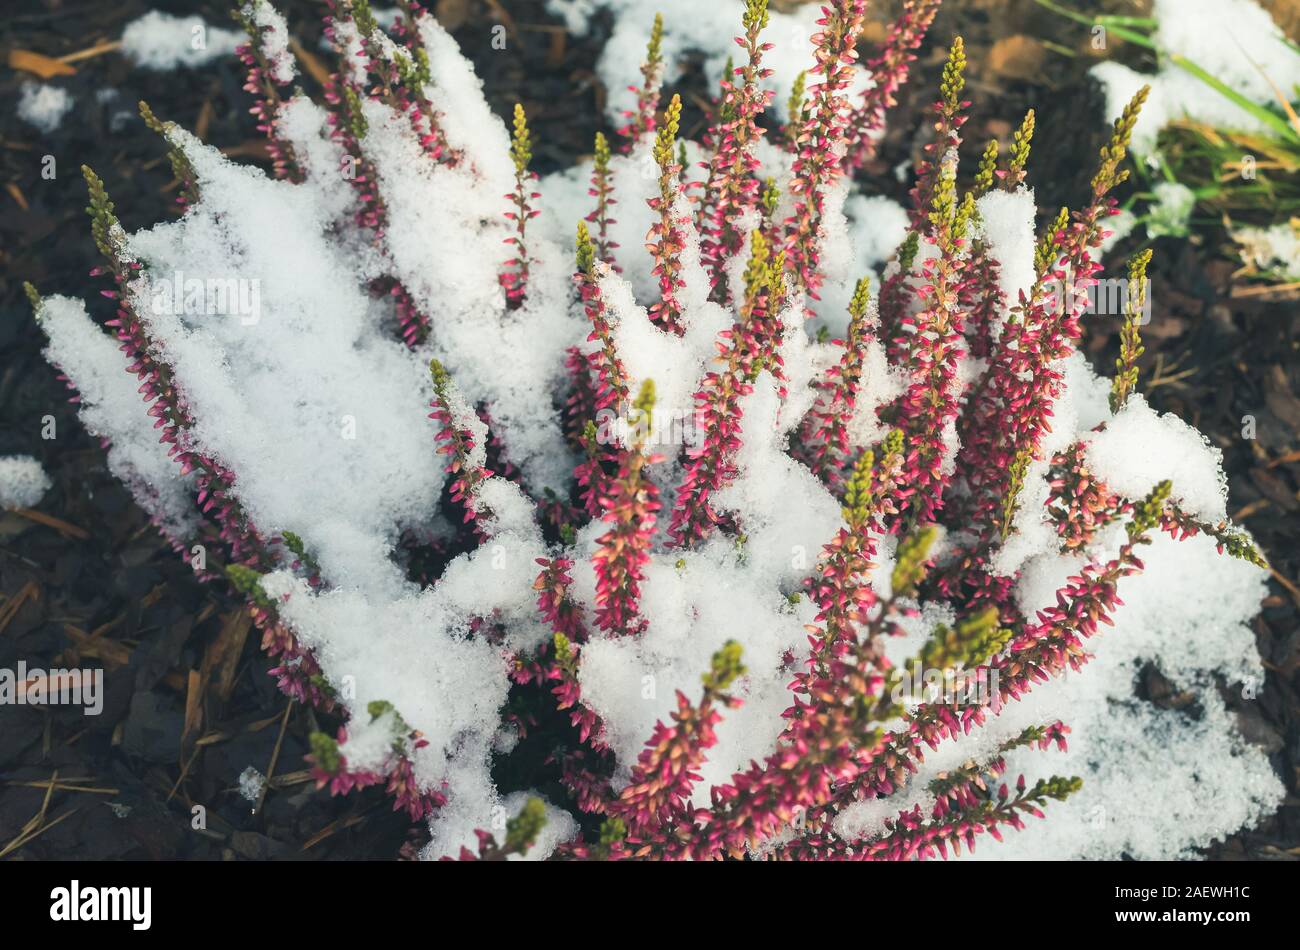 Red heather flowers covered with snow, natural macro photo. Calluna vulgaris known as common heather, ling, or simply heather Stock Photo